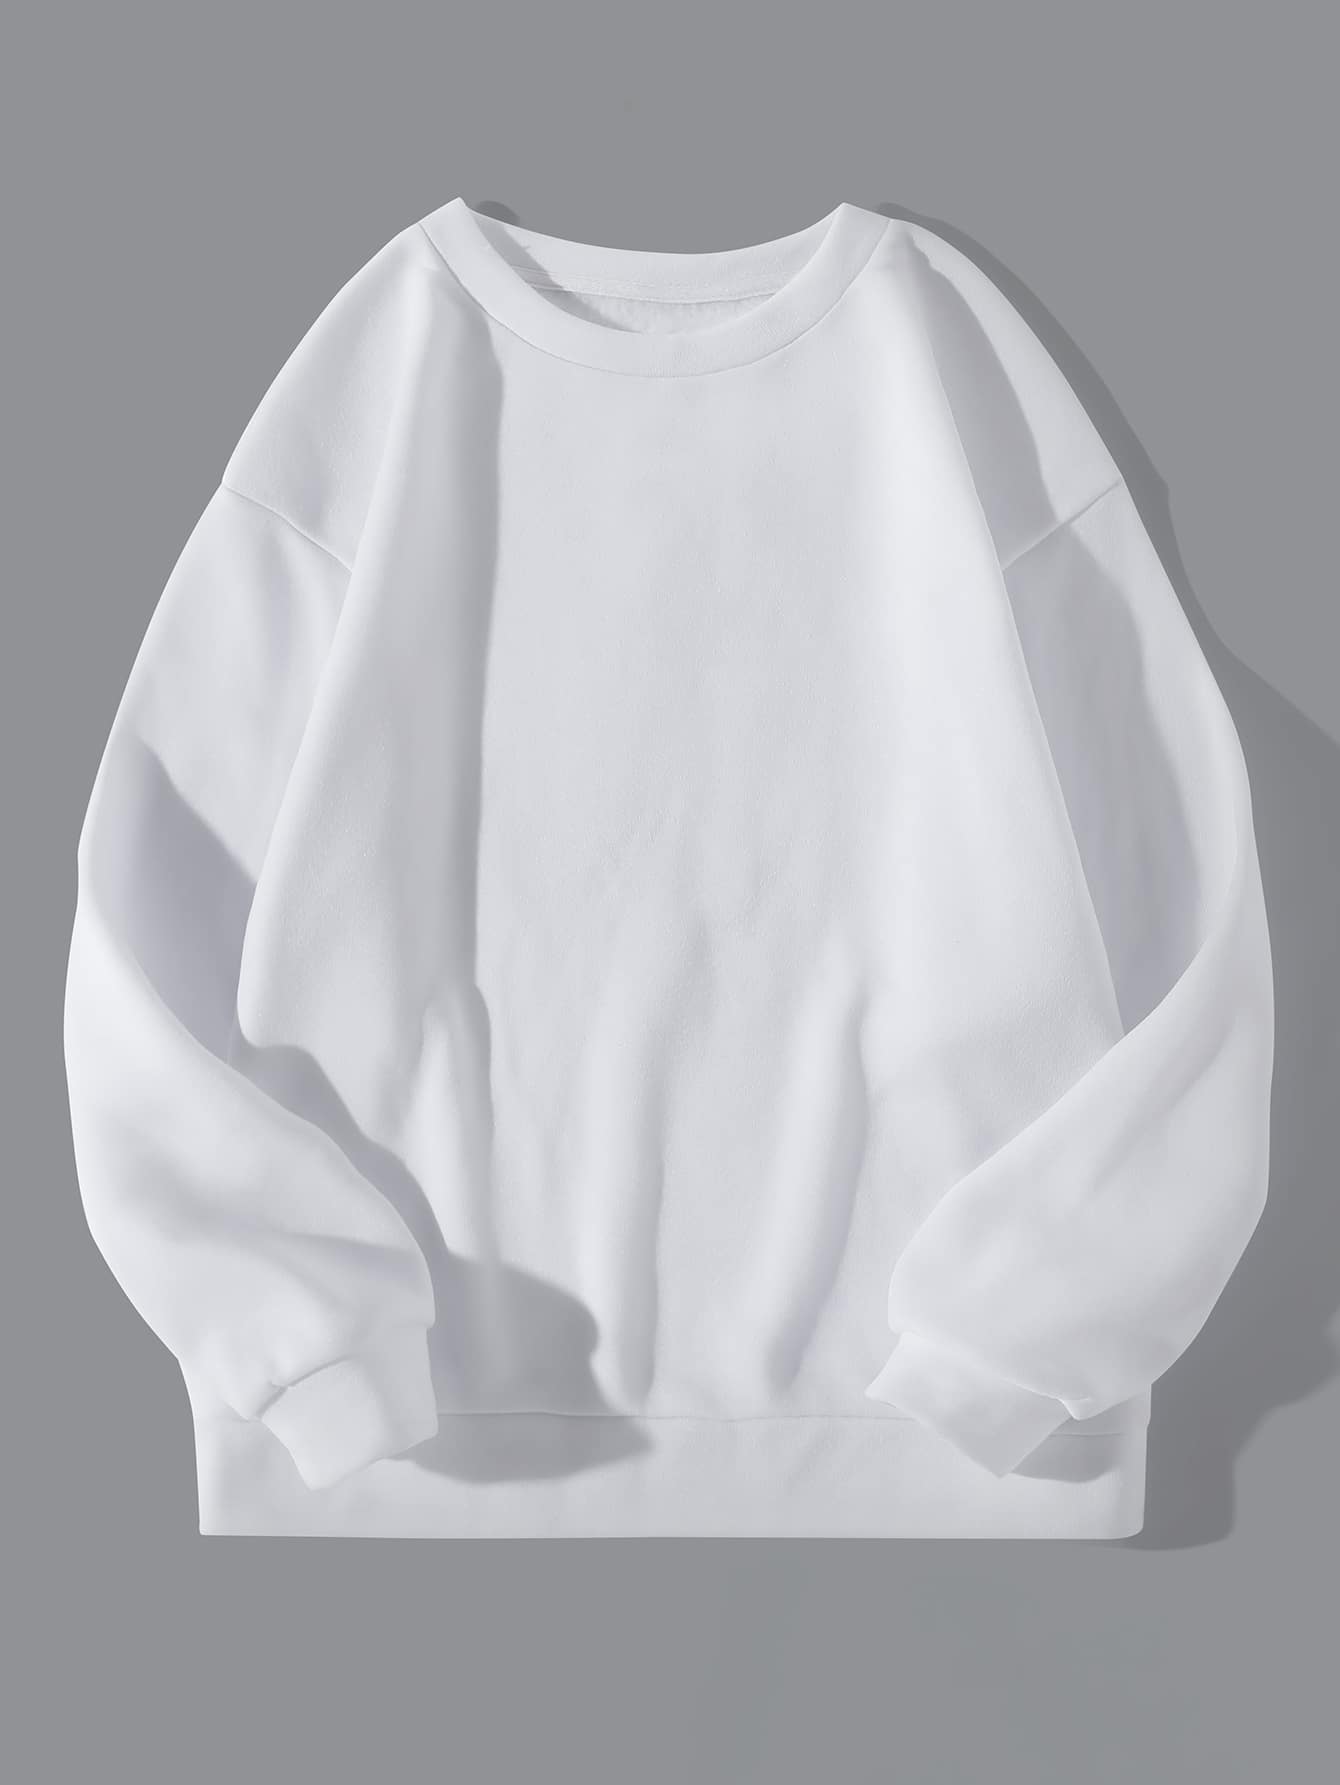 Solid Thermal Lined Sweatshirt